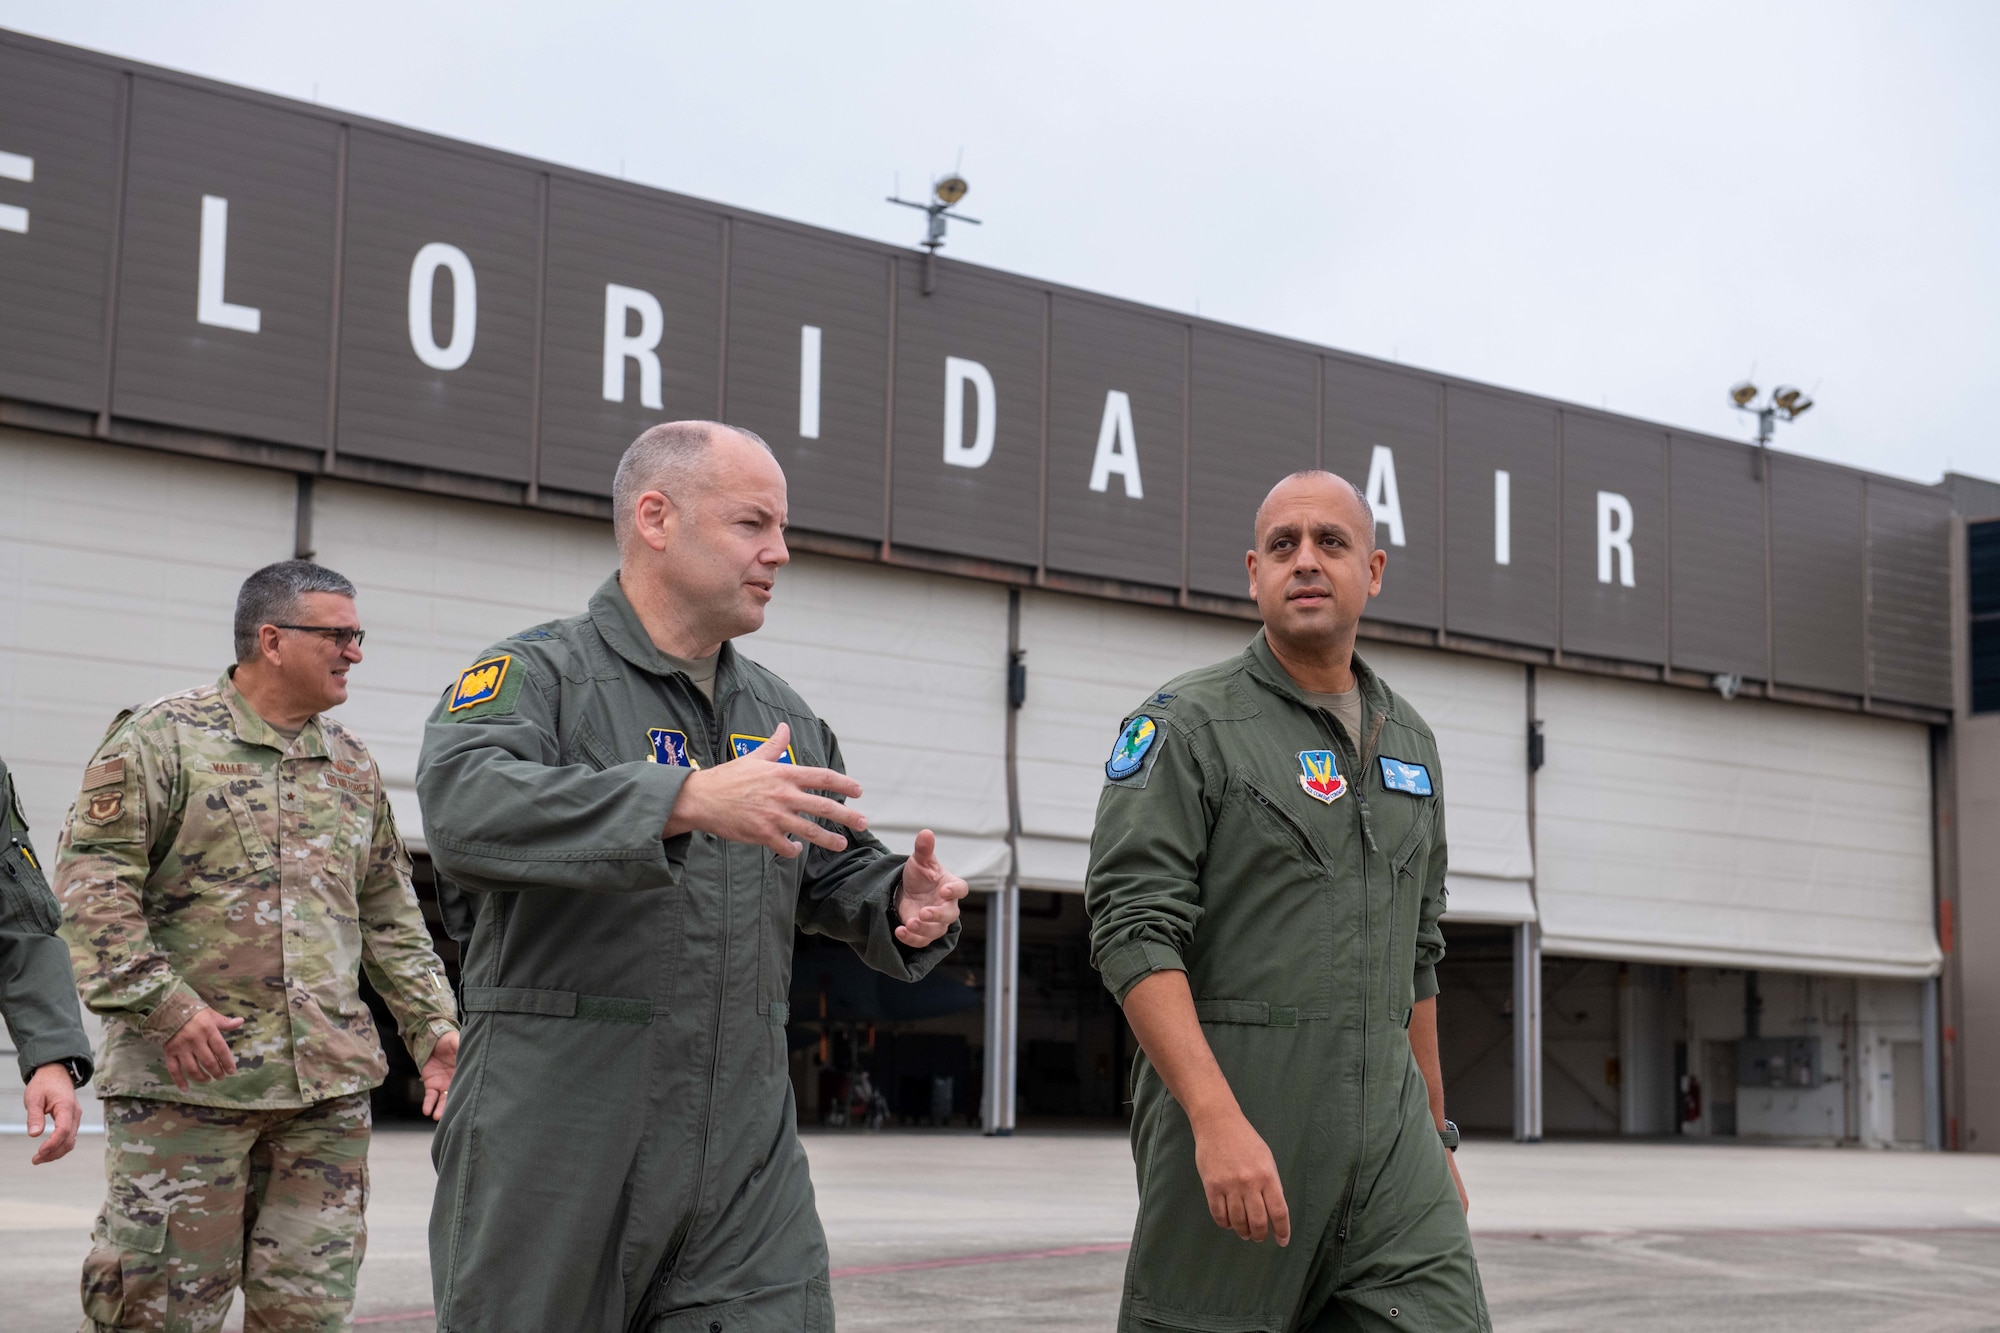 U.S. Air Force Maj. Gen. Duke Pirak, center, deputy director, Air National Guard, speaks with Col. Mansour Elhihi, right, commander, 125th Operations Group, 125th Fighter Wing, Florida National Guard during a visit to the Jacksonville Air National Guard Base, Florida, Sept. 13, 2022. During his visit, Pirak received a mission brief, an update on the Wing's F-35A Lightning II conversion and recognized five outstanding Airmen from across the unit. (U.S. Air National Guard photo by Tech. Sgt. Chelsea Smith)